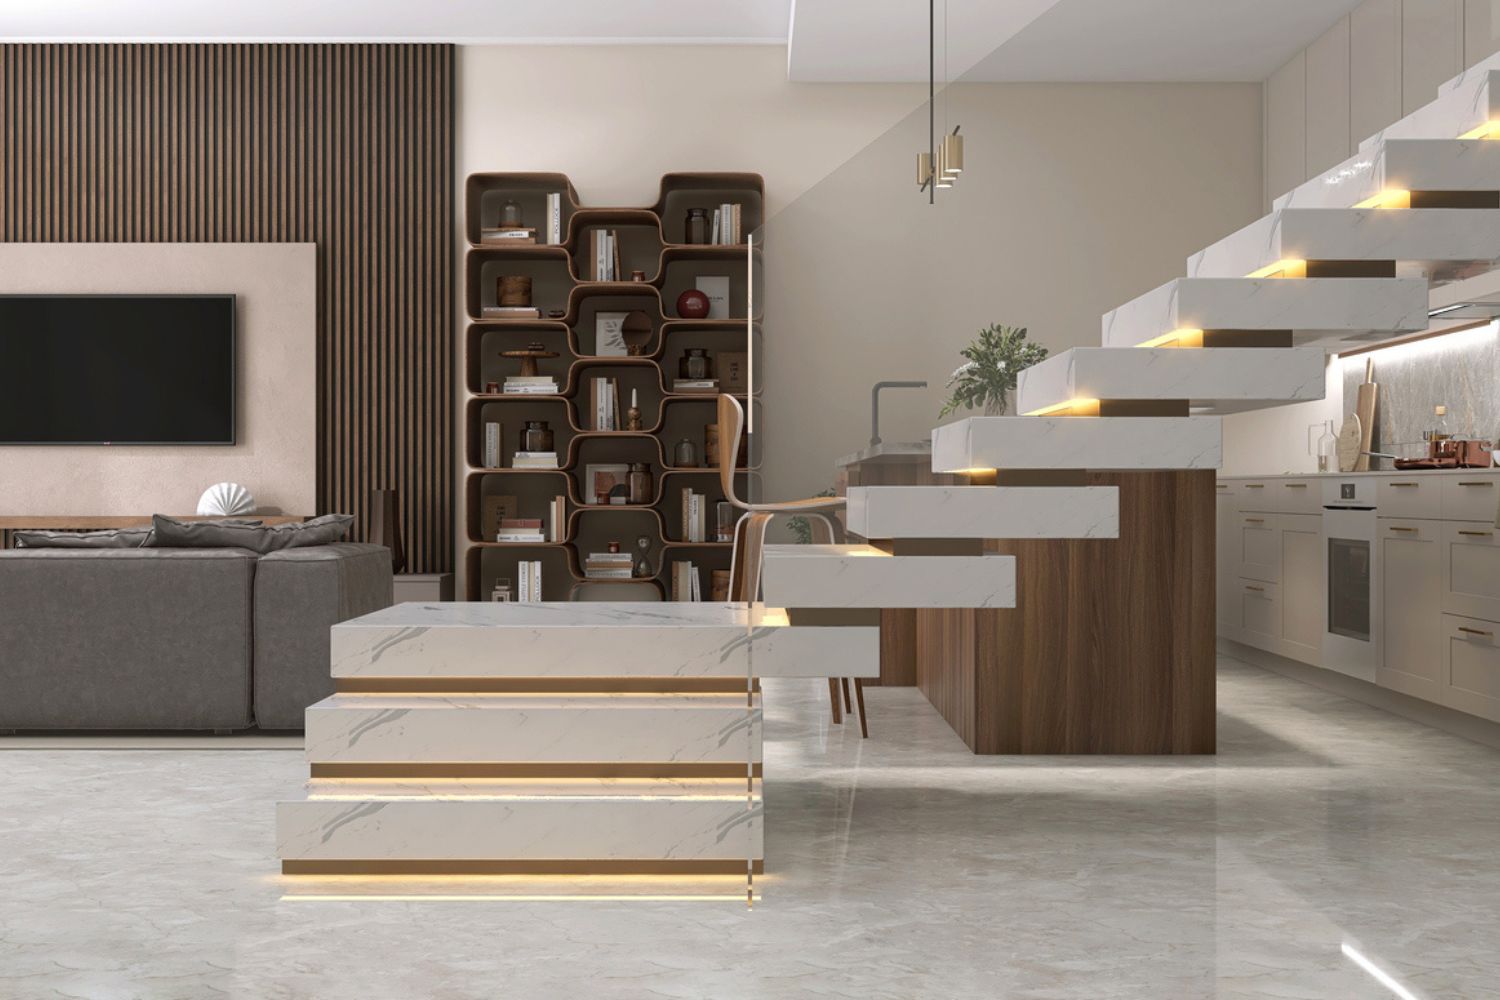 How Much Does a Floating Staircase Cost?